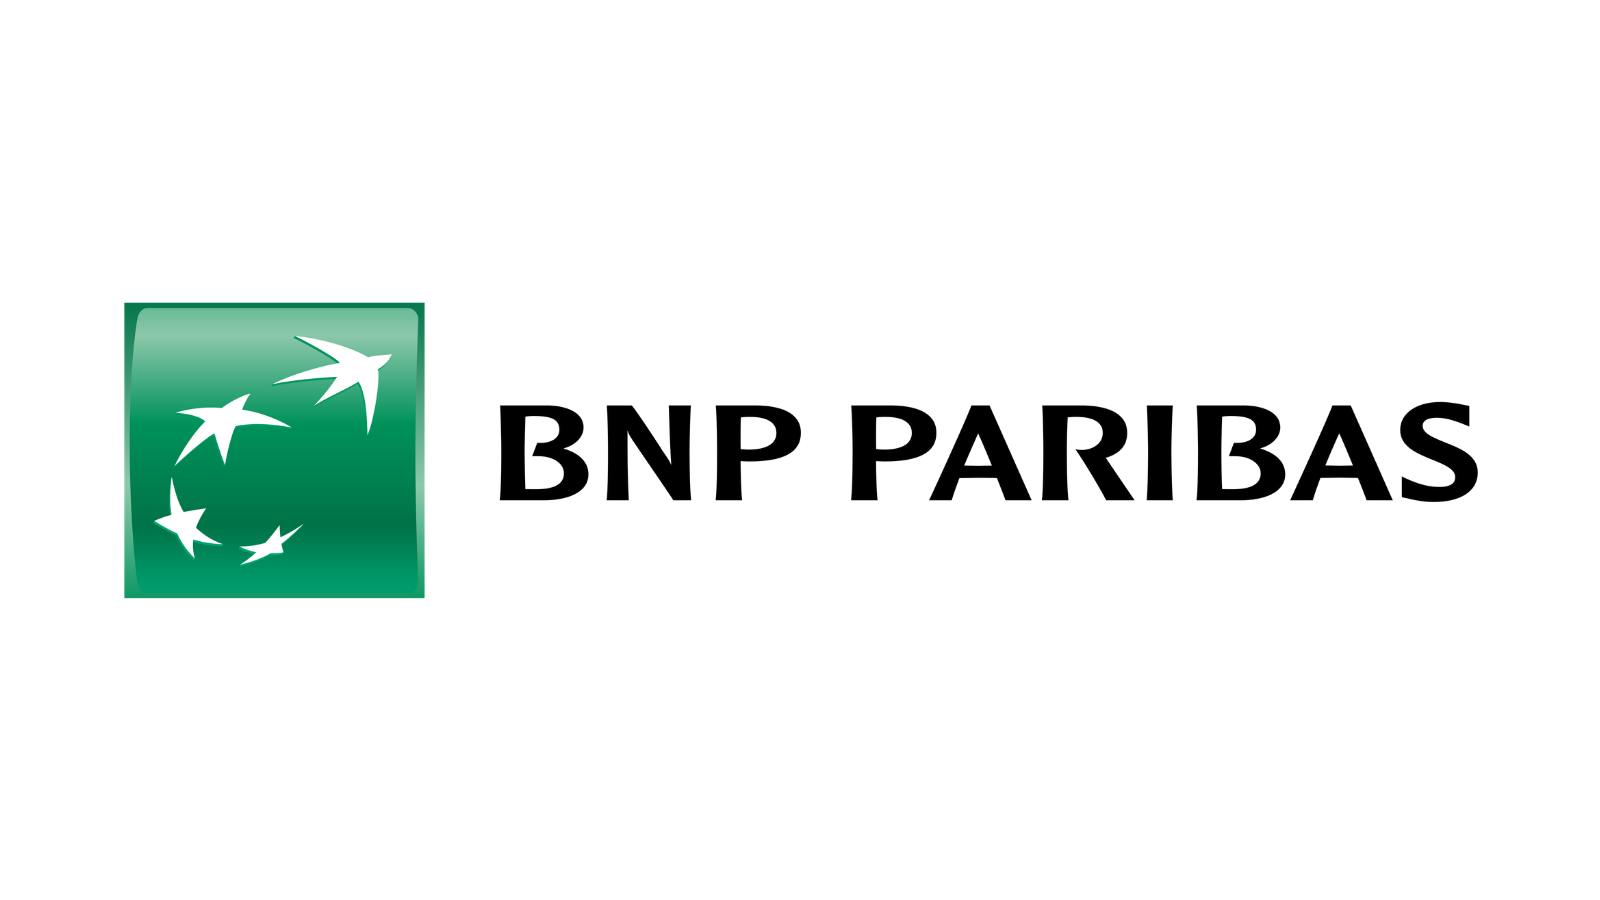 BNP Paribas and Deutsche Bank complete the transfer of Global Prime Finance & Electronic Equities to BNP Paribas